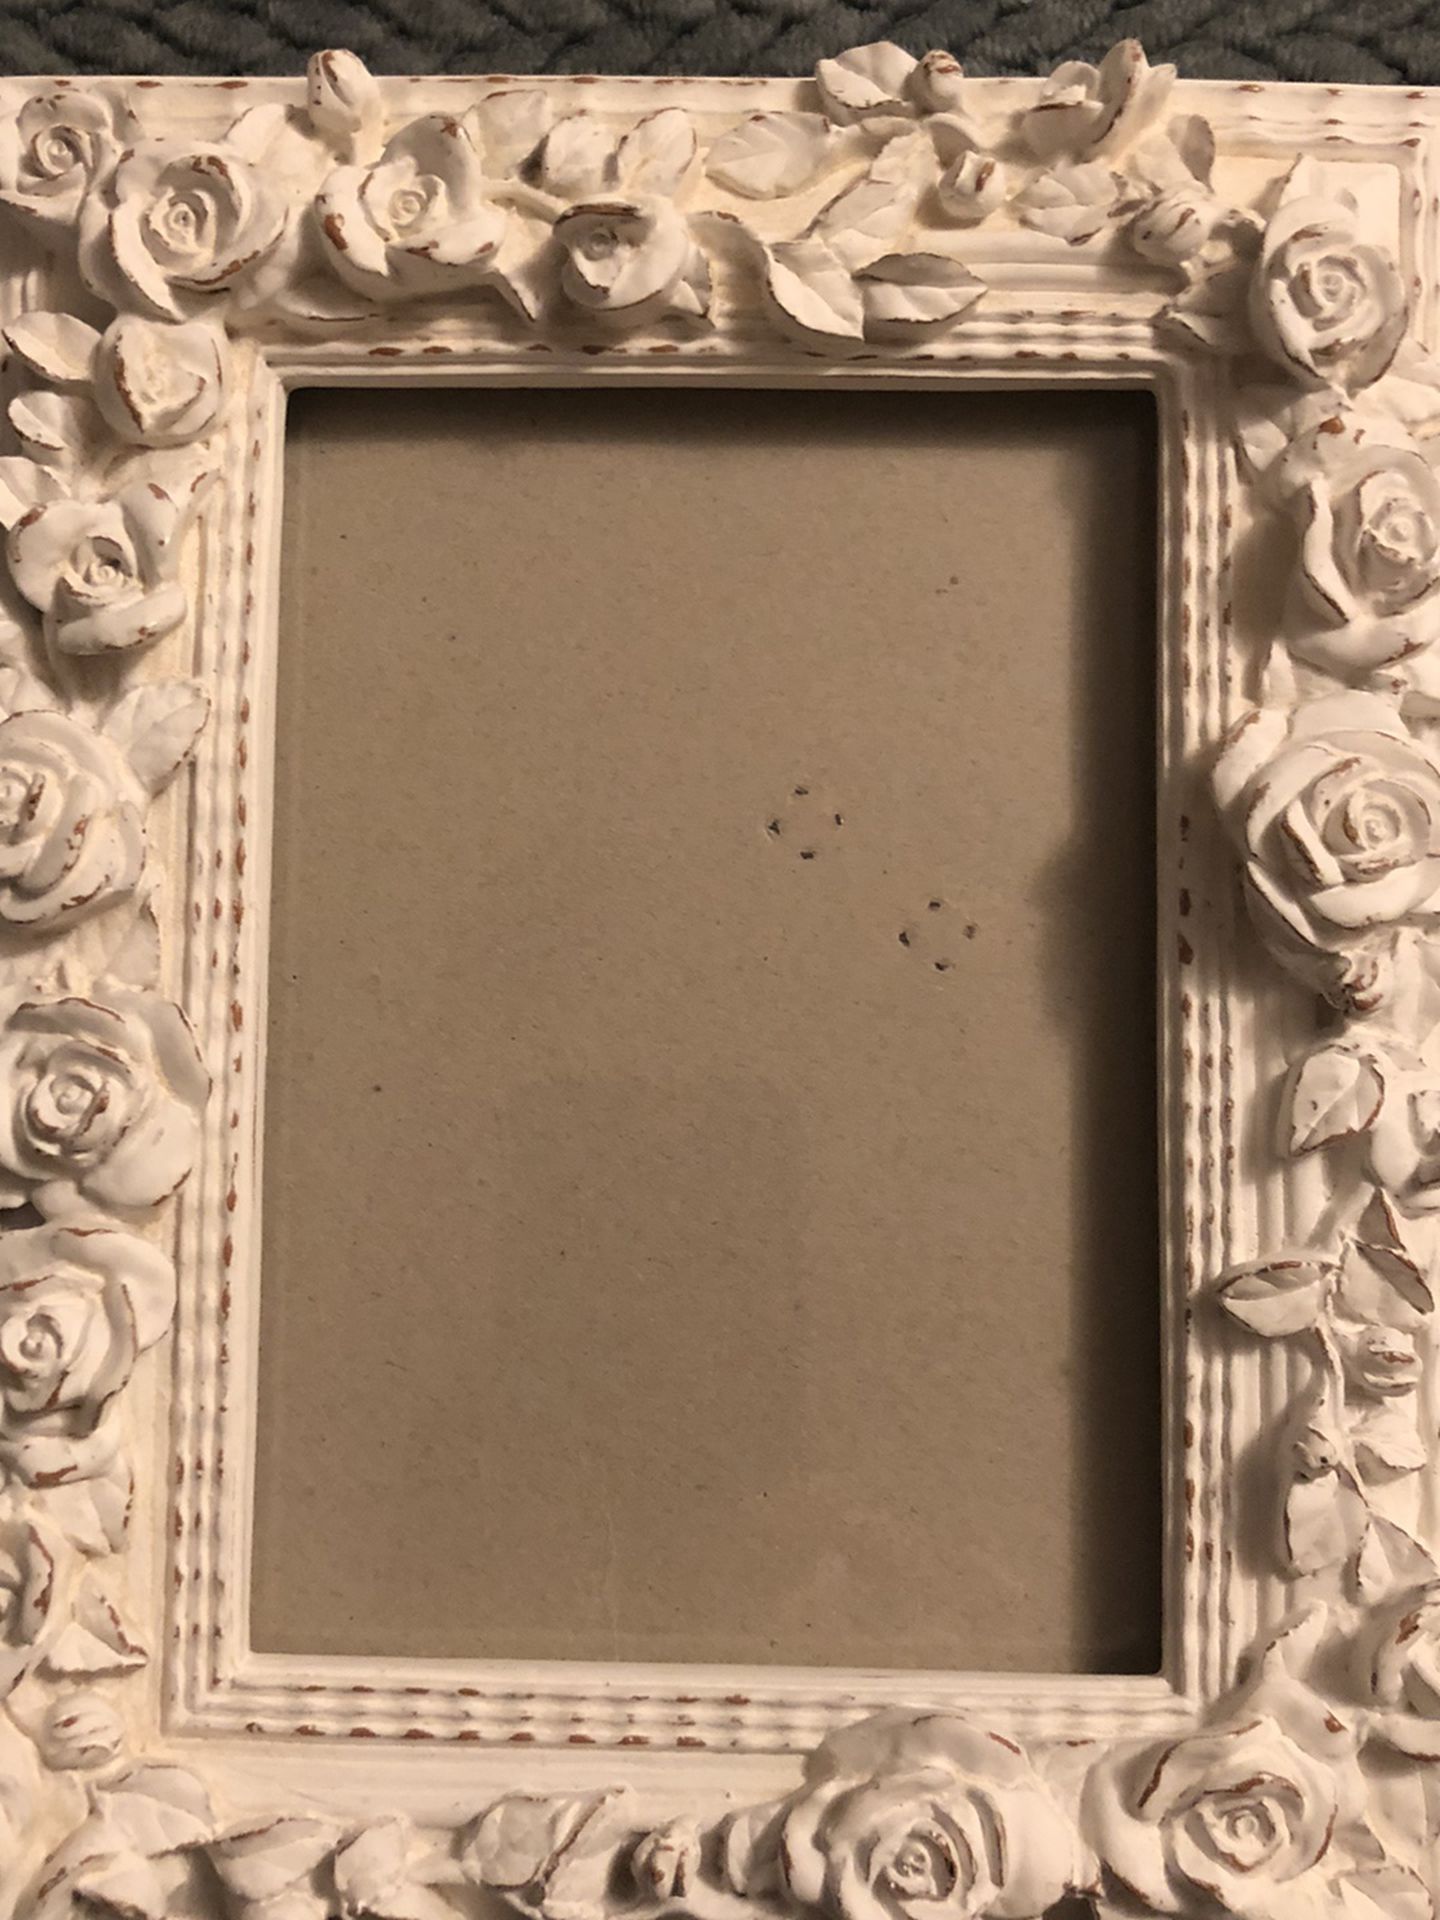 White Picture Frame